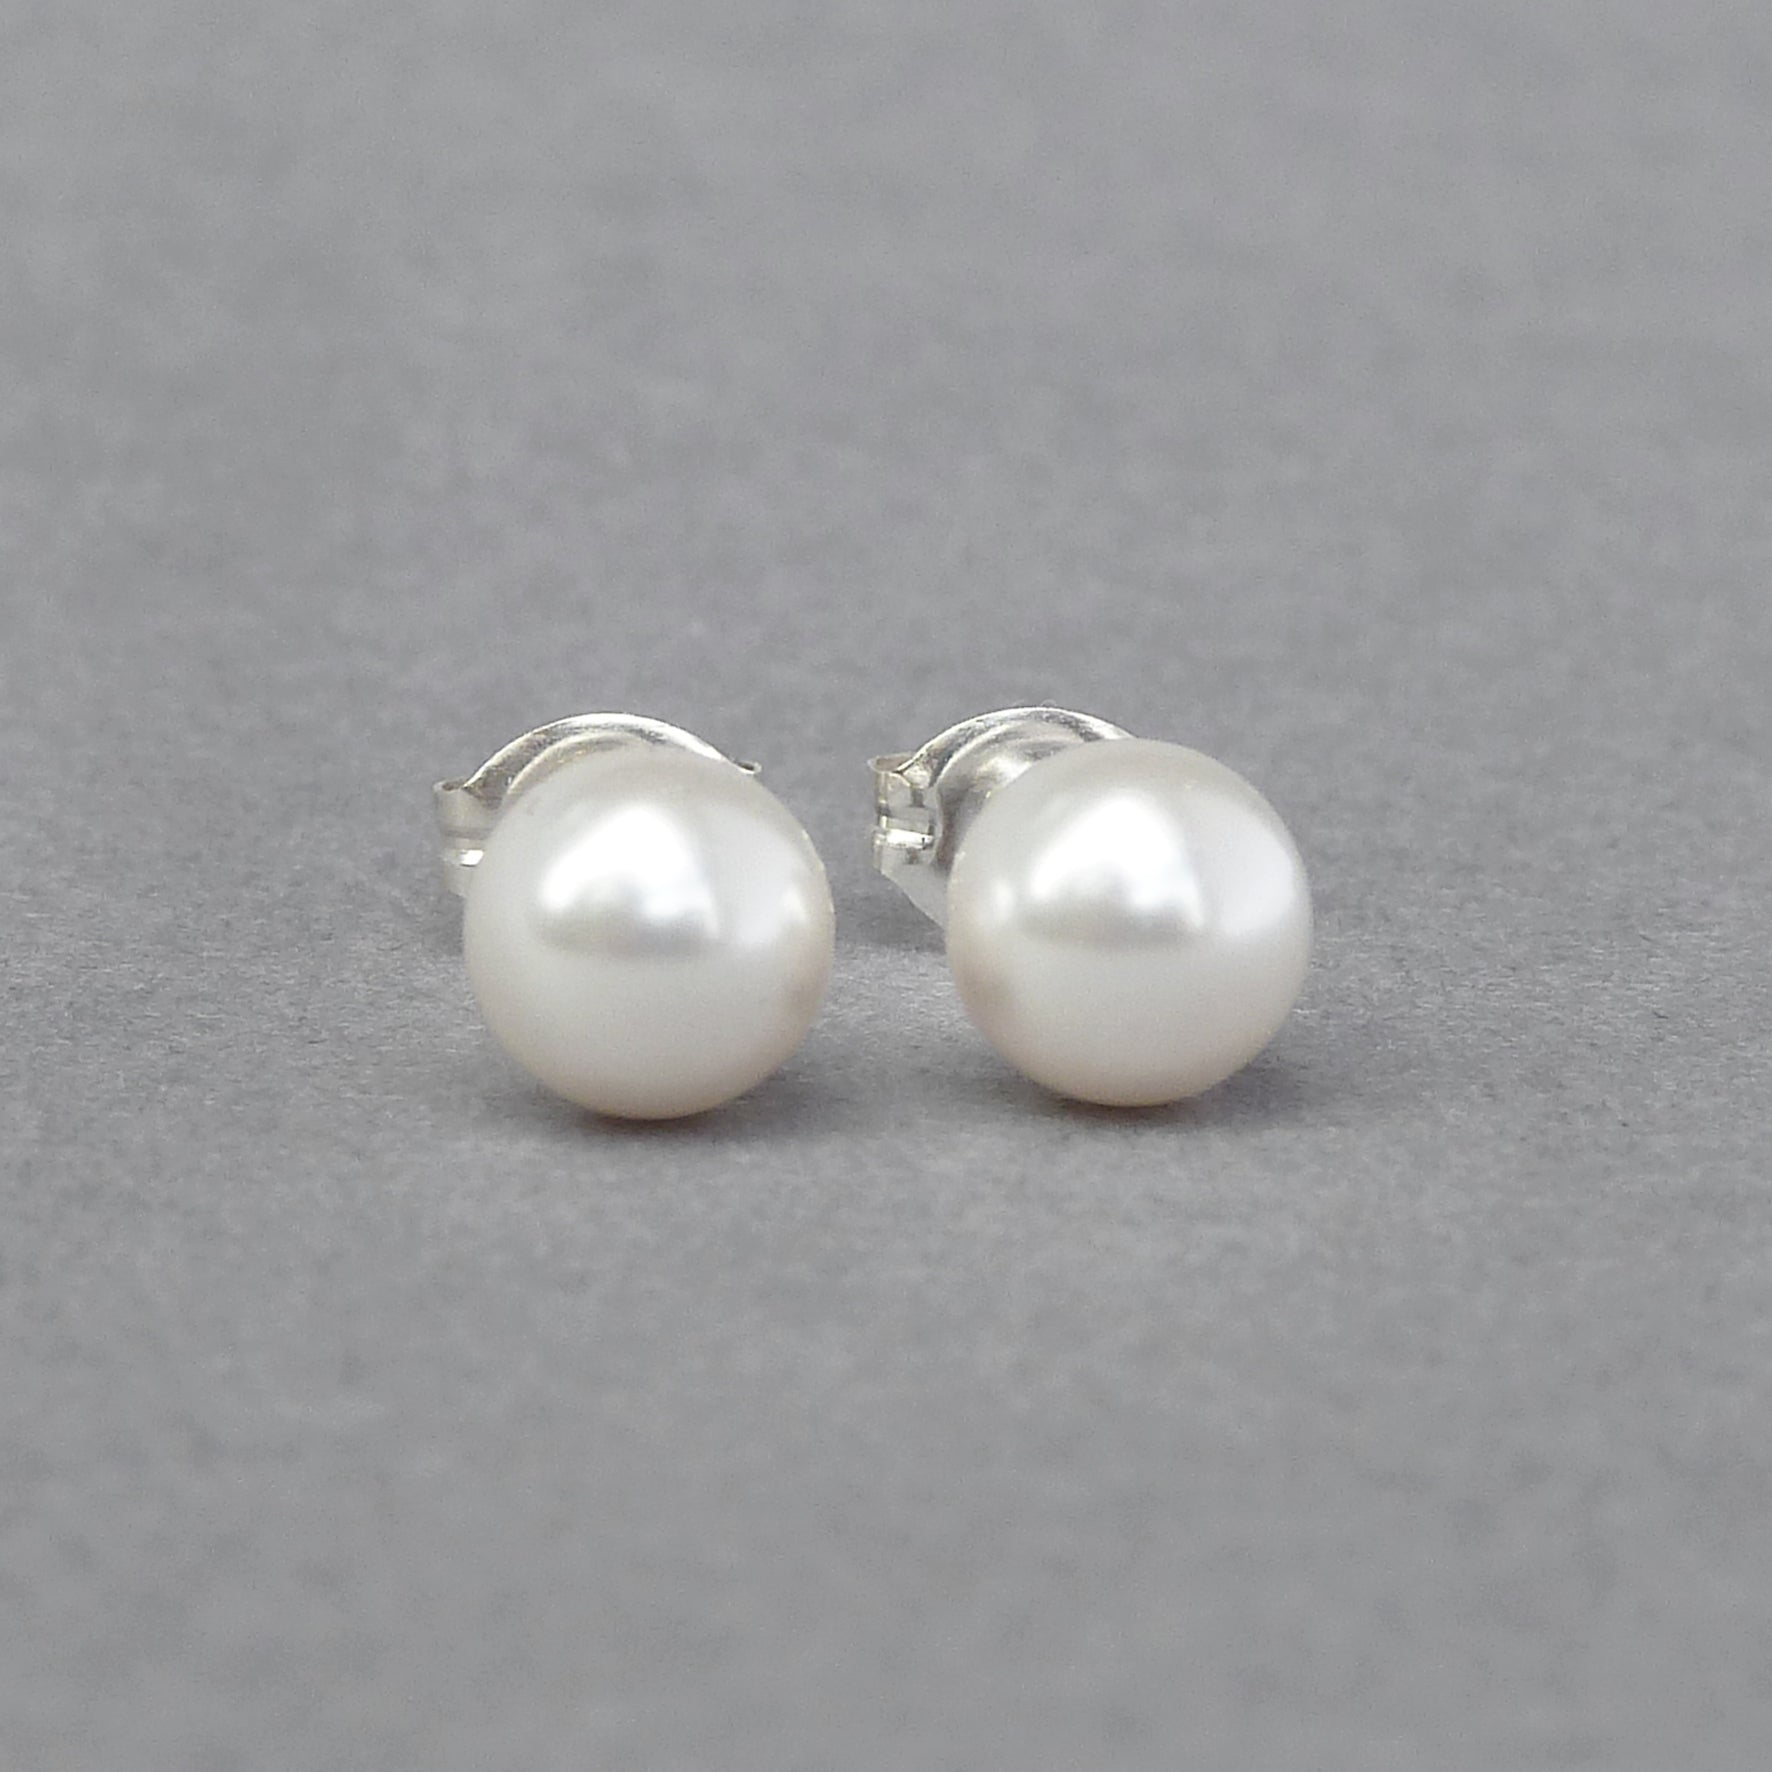 6mm white pearl studs